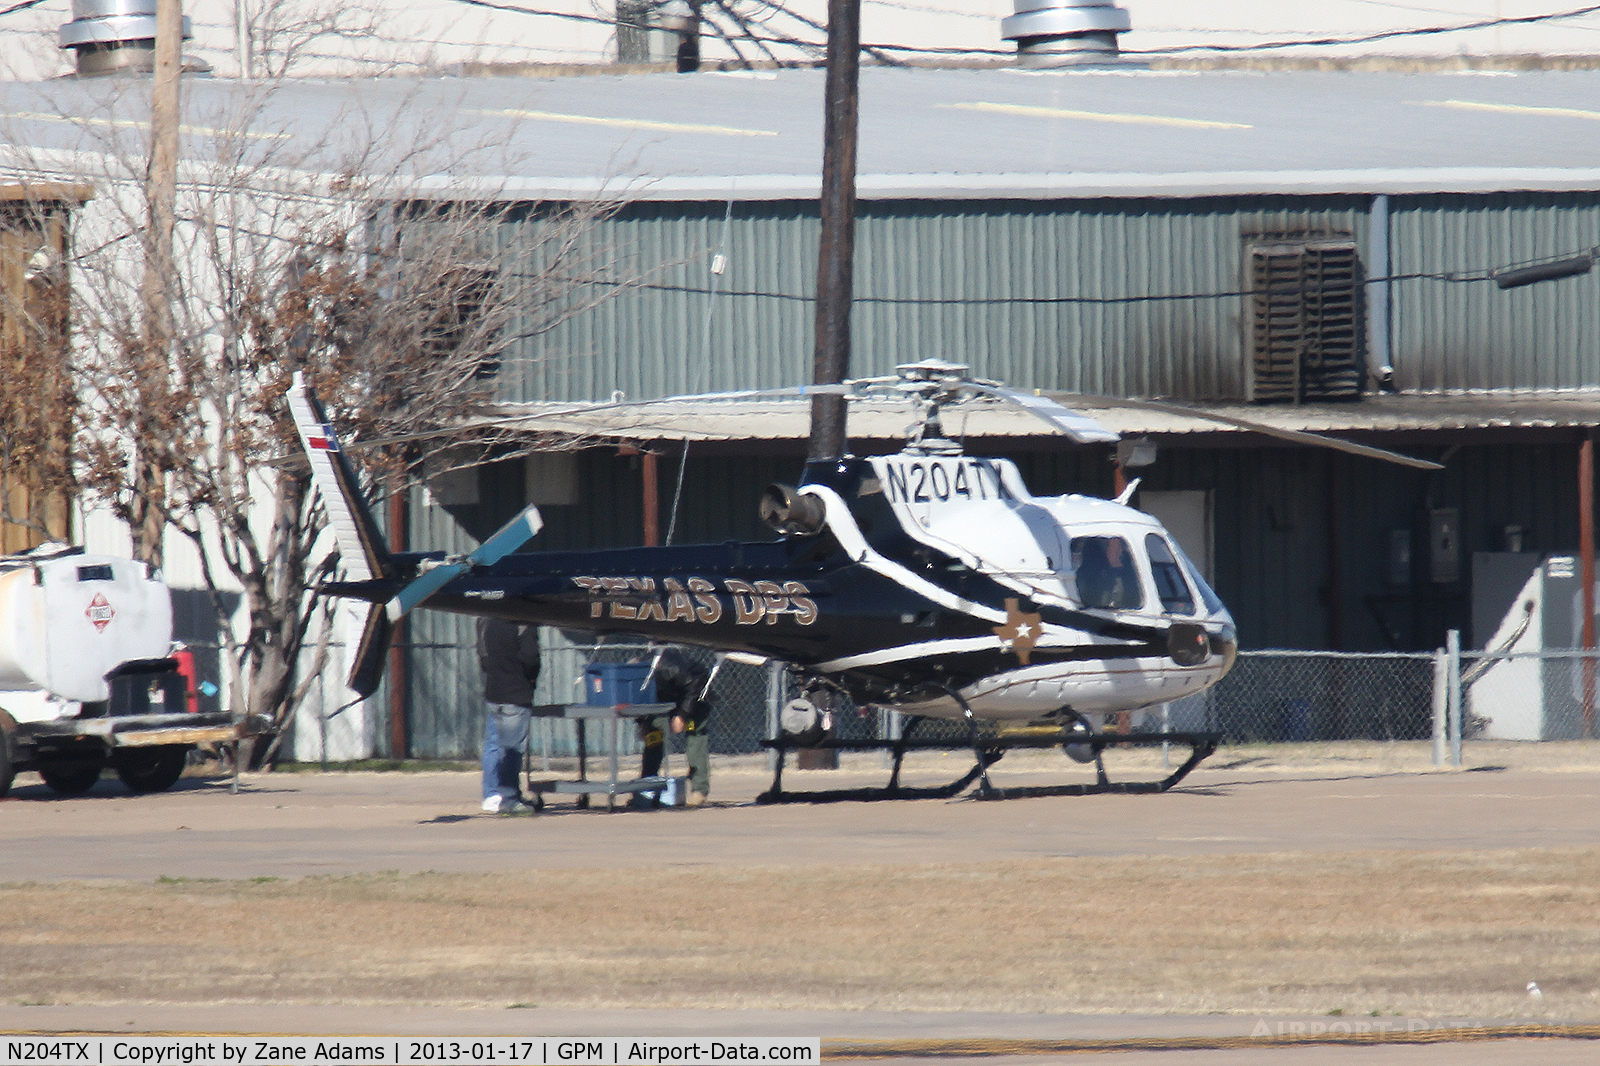 N204TX, 2003 Eurocopter AS-350B-2 Ecureuil C/N 3711, Texas Department of Public Safety helicopter At Grand Prairie Municipal Airport